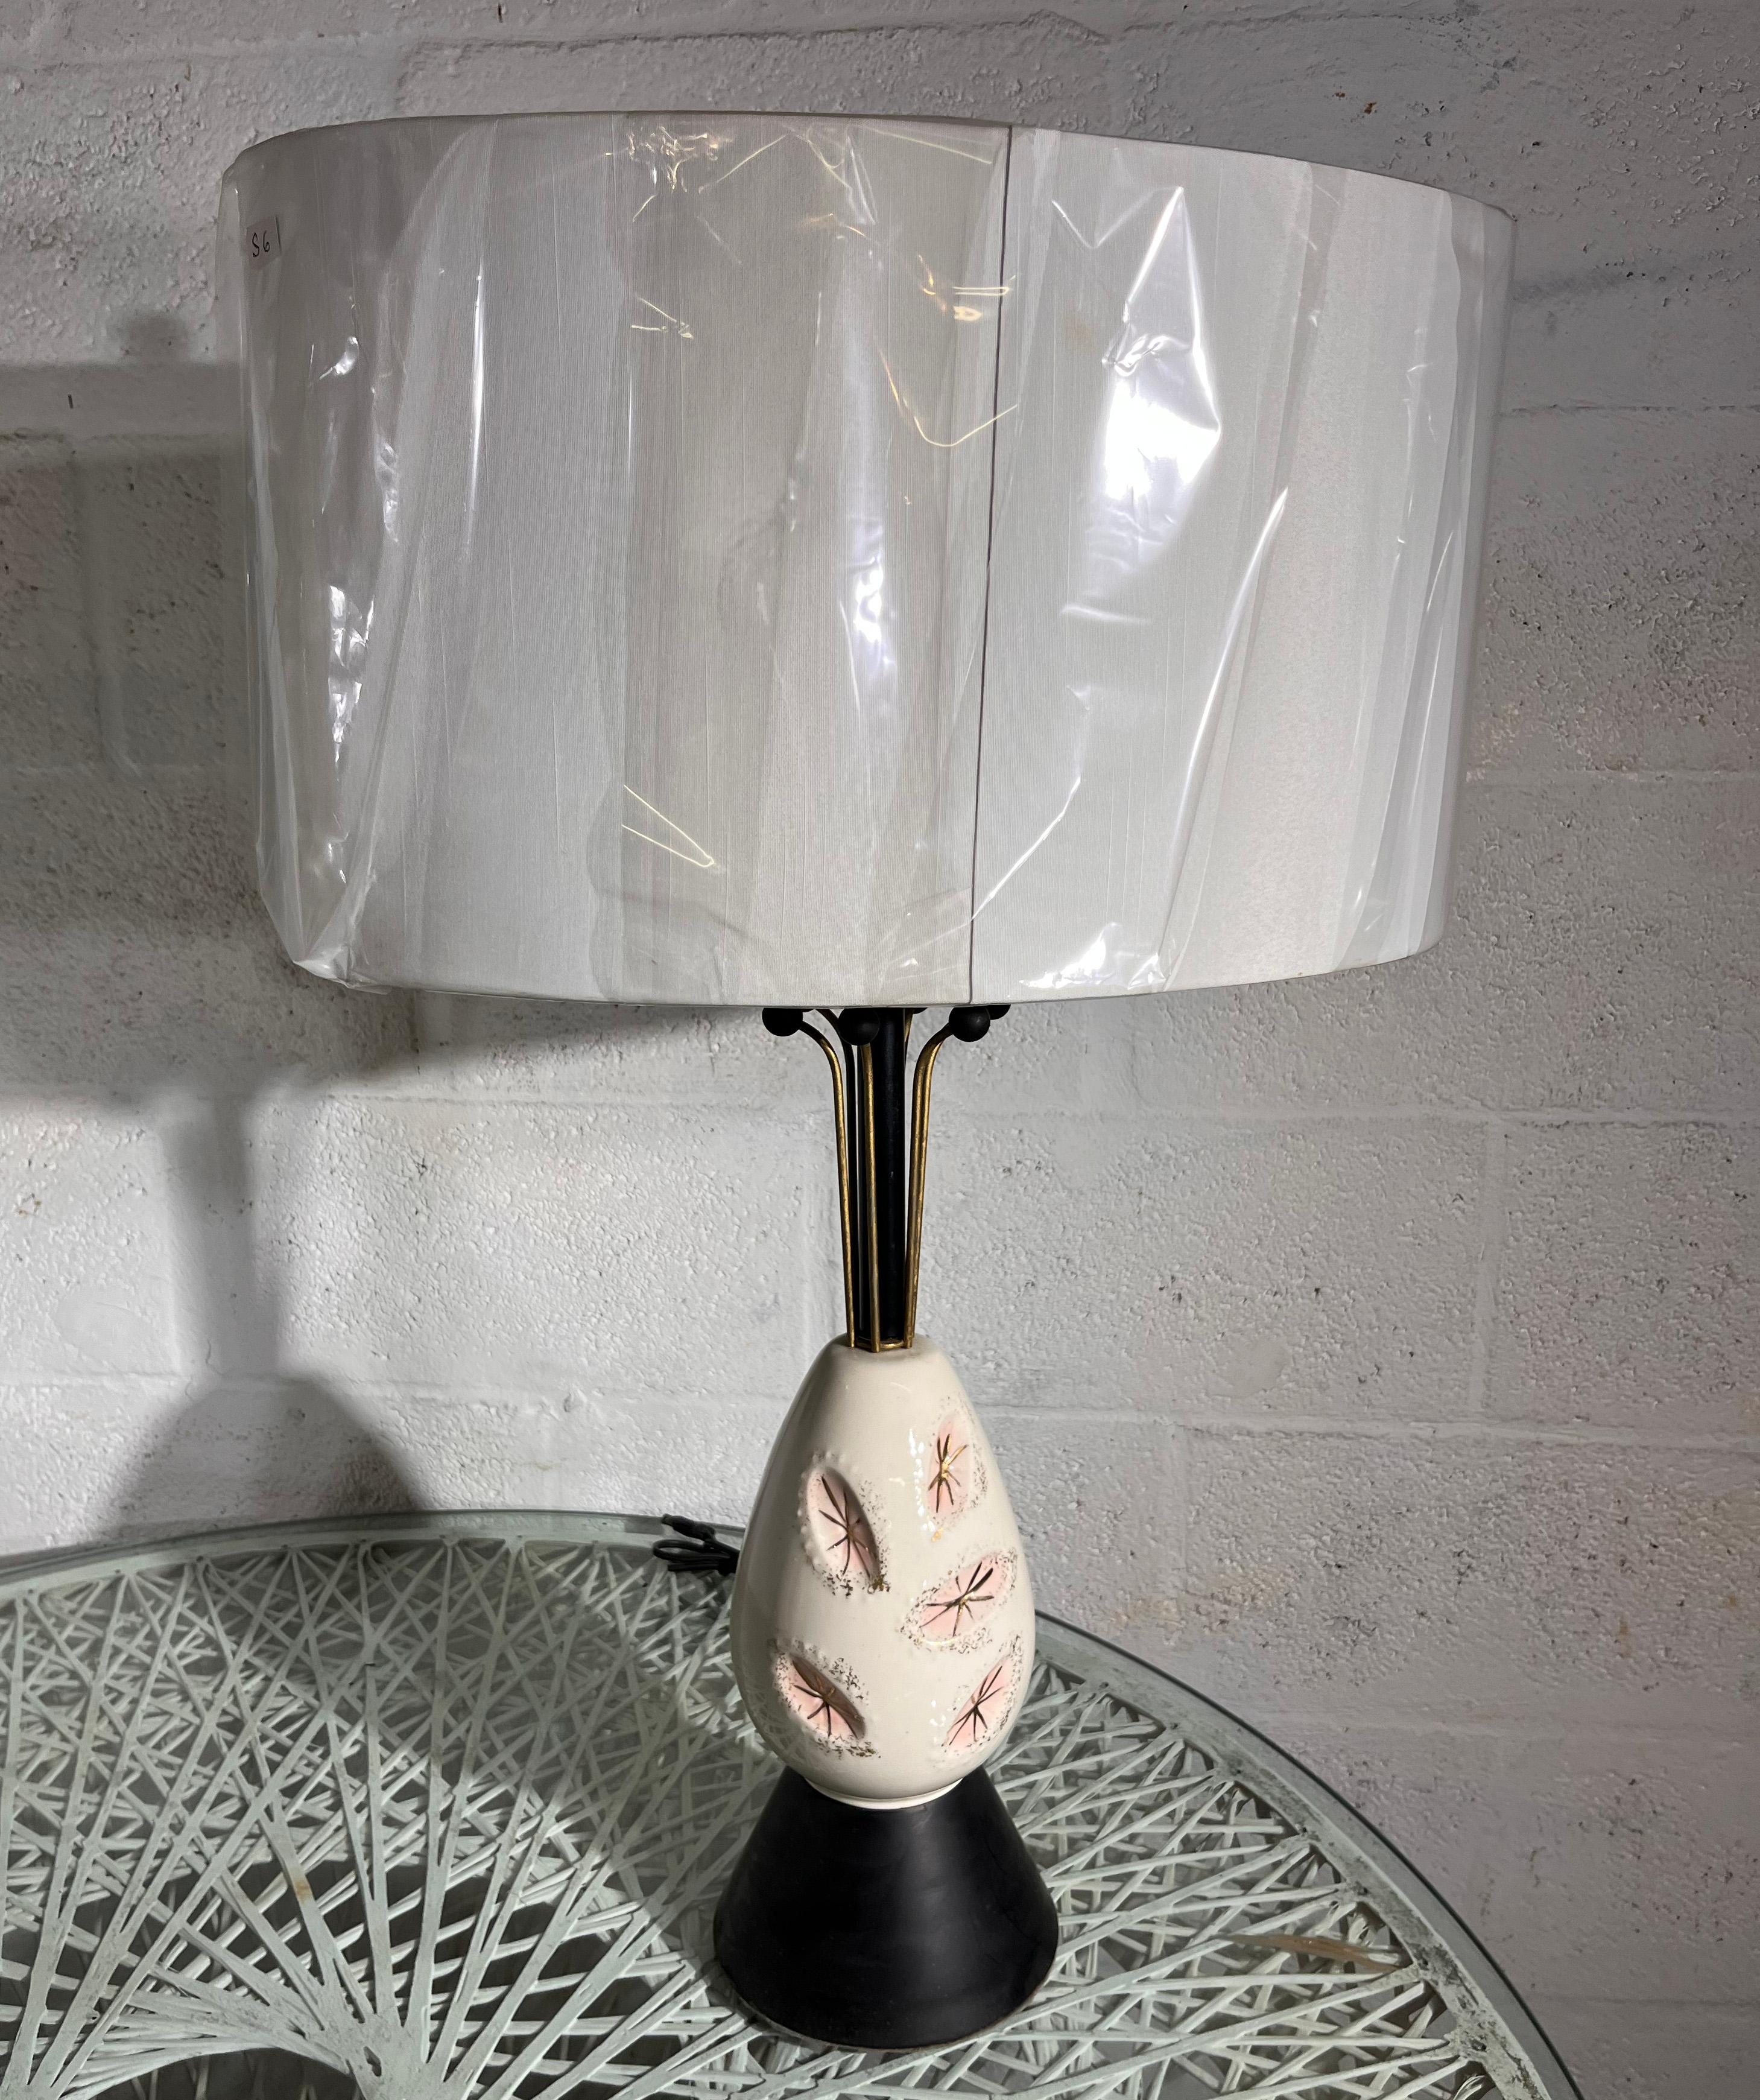 Mid-Century Modern pair of American ceramic table lamps. Typical from this period.